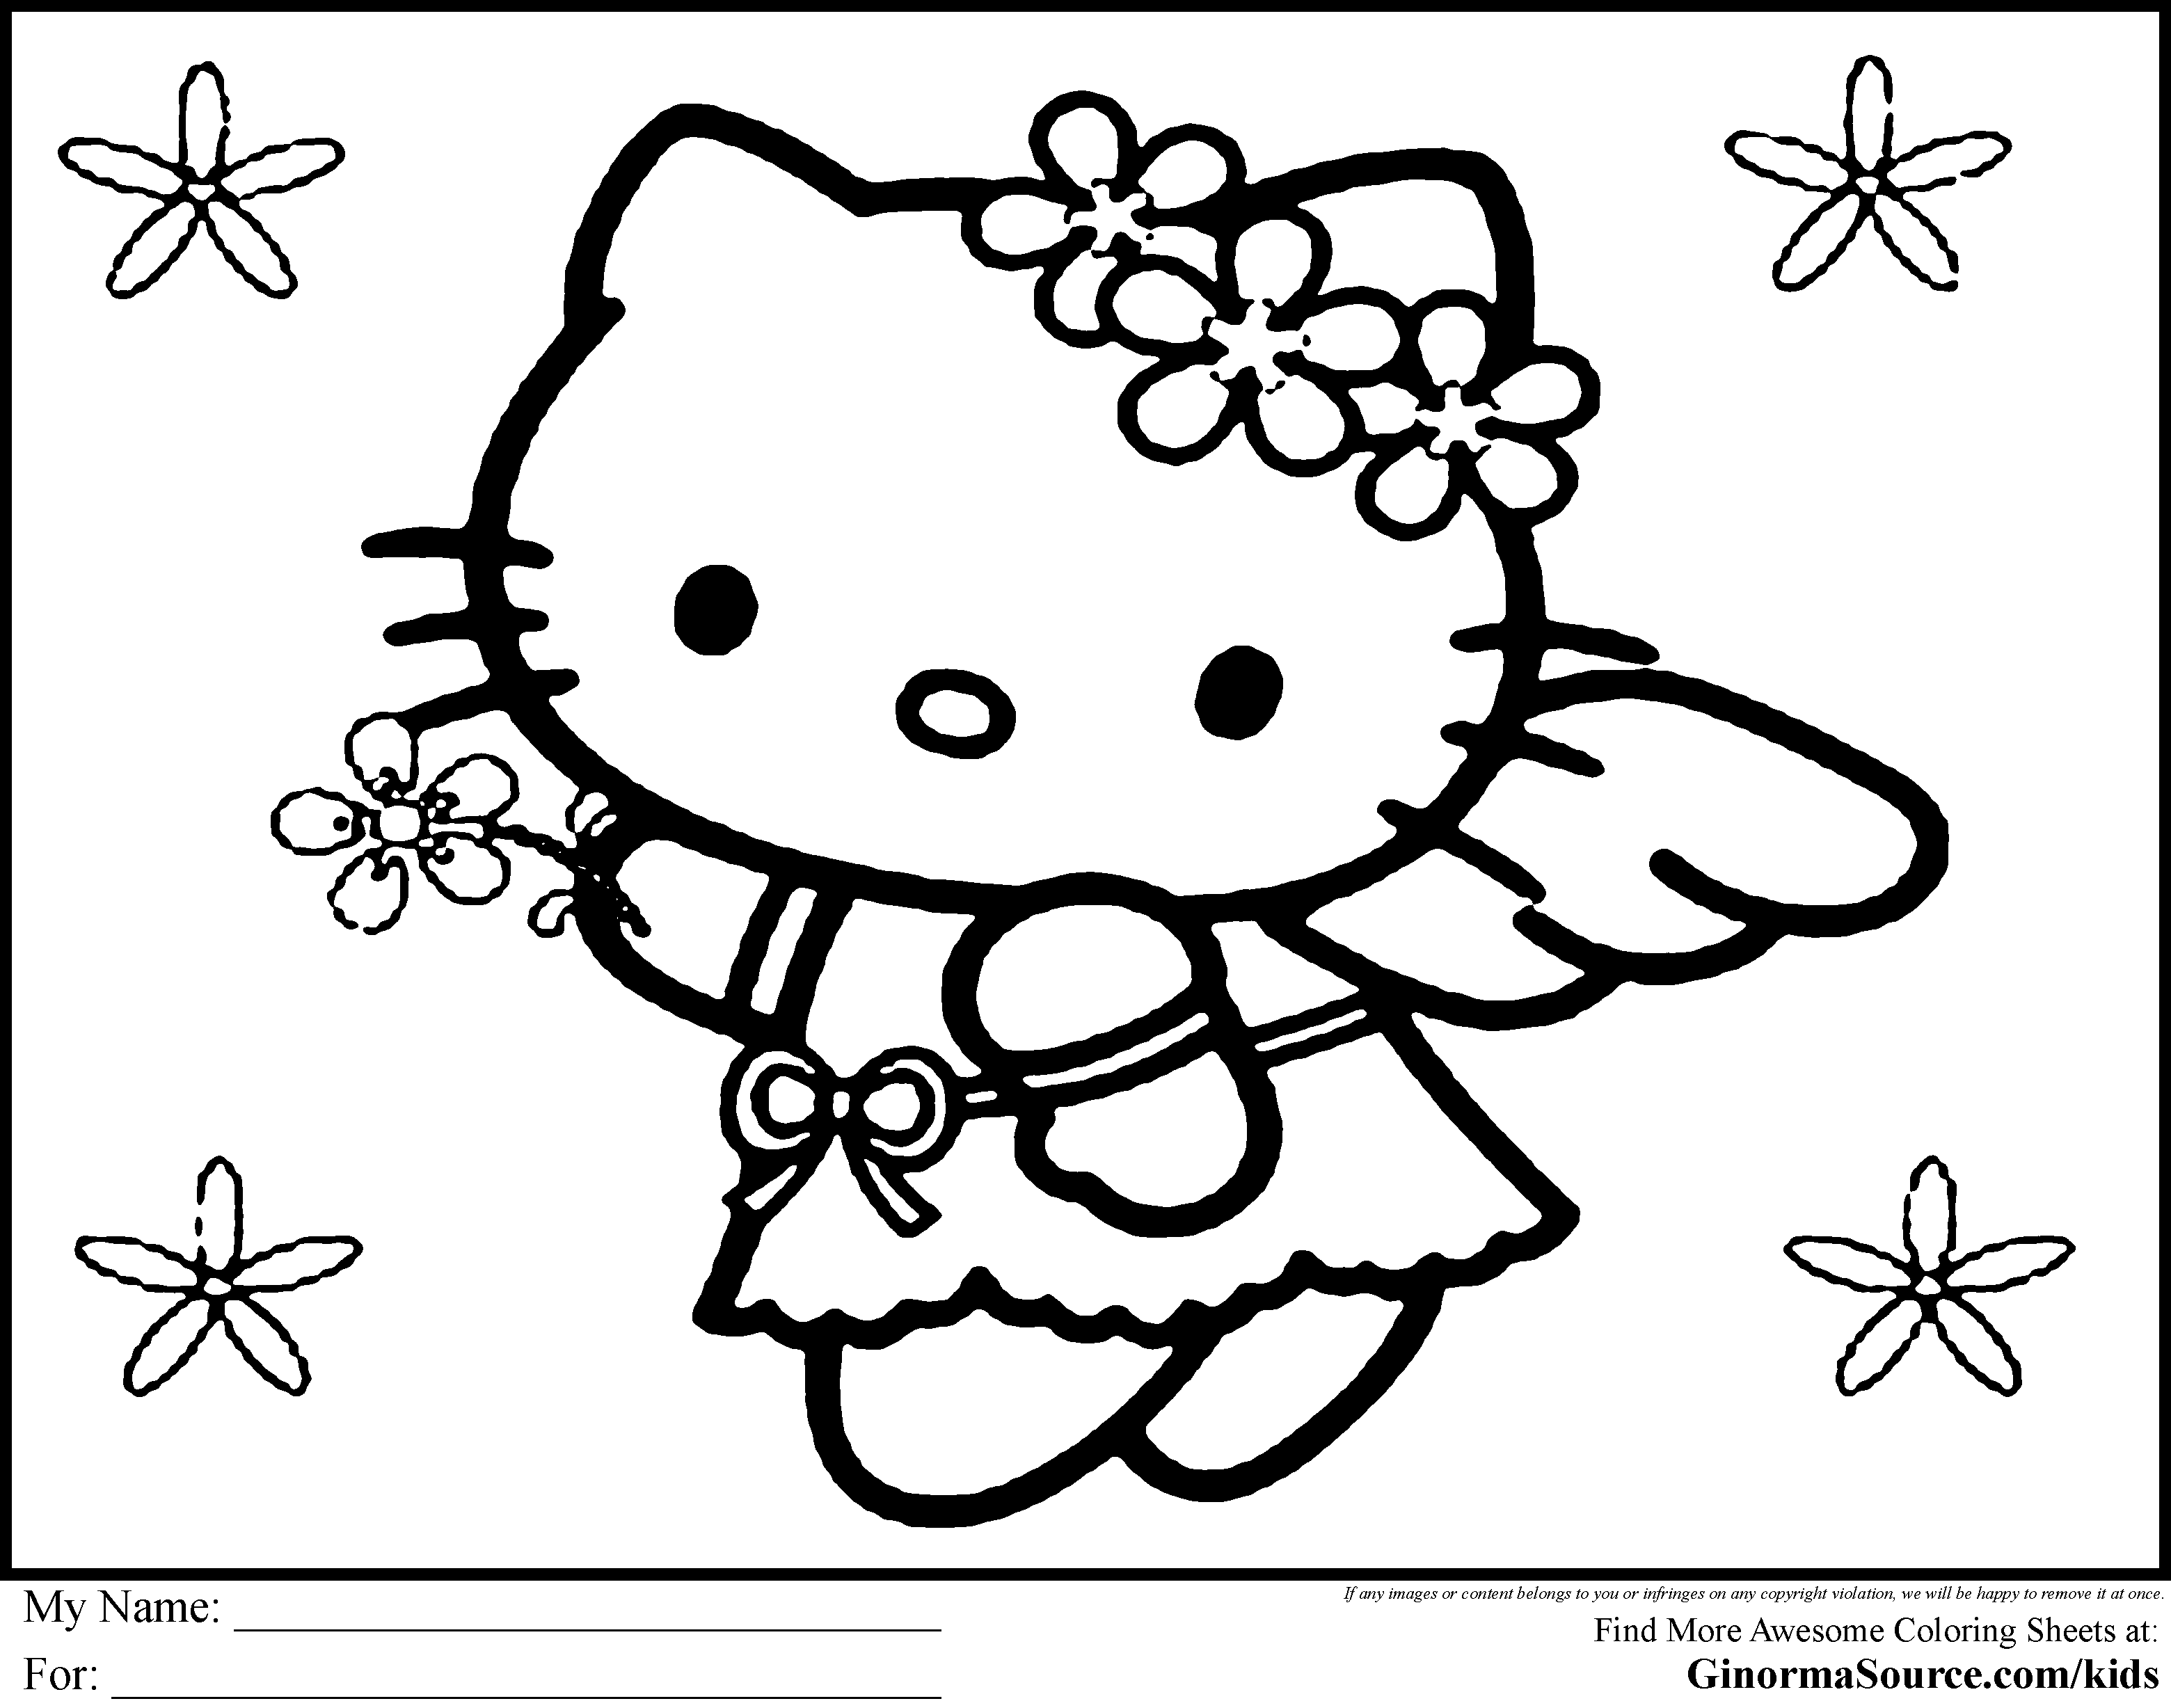 kbrguru-hello-kitty-coloring-in-big-pages